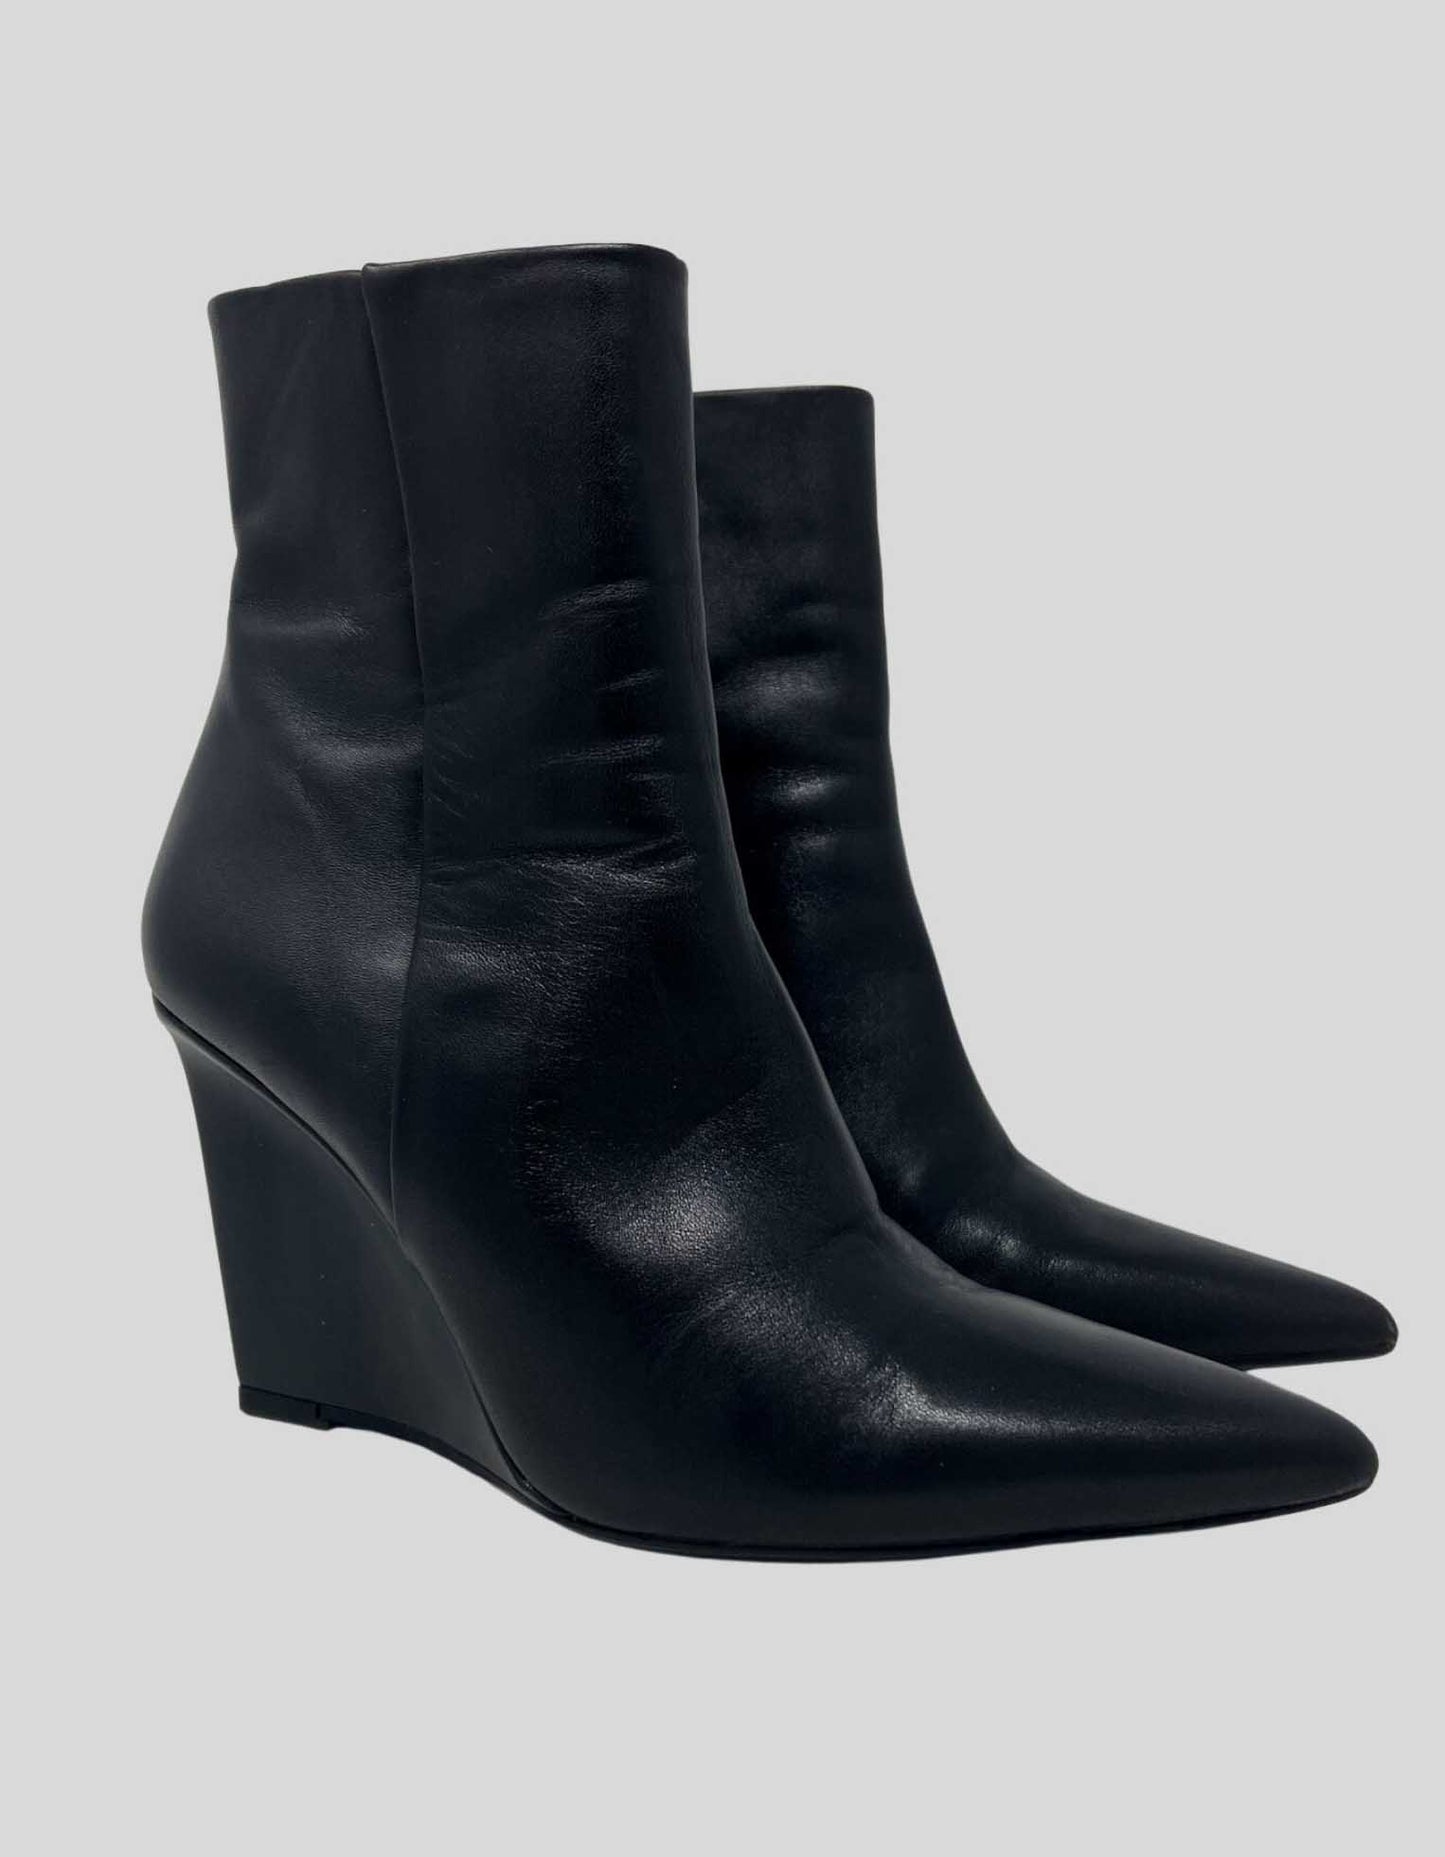 ZARA Leather Wedge Ankle Boots - 37 IT | 7 US